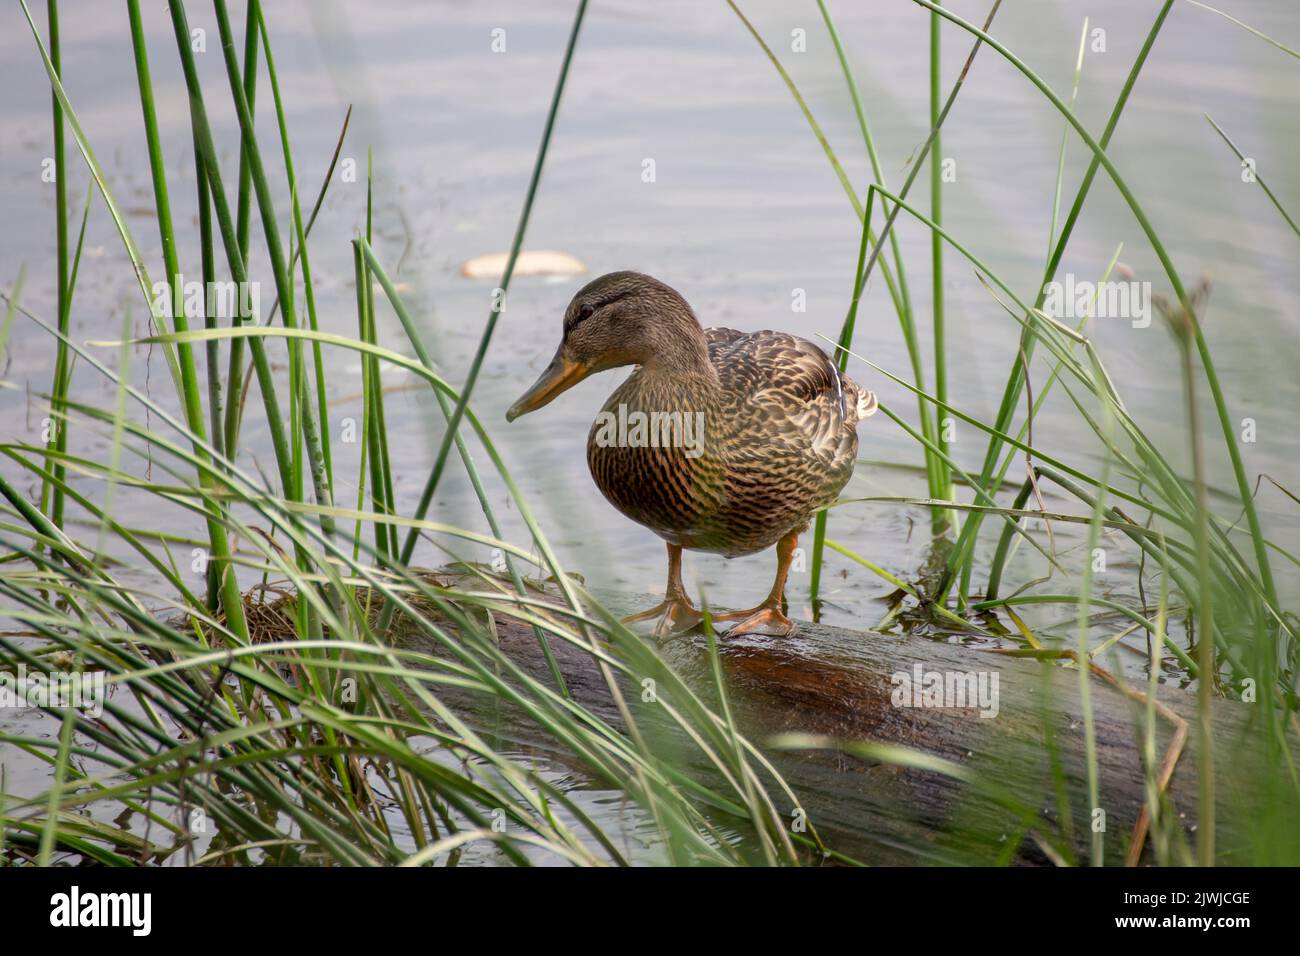 Photo of the duck on wooden log among grass Stock Photo